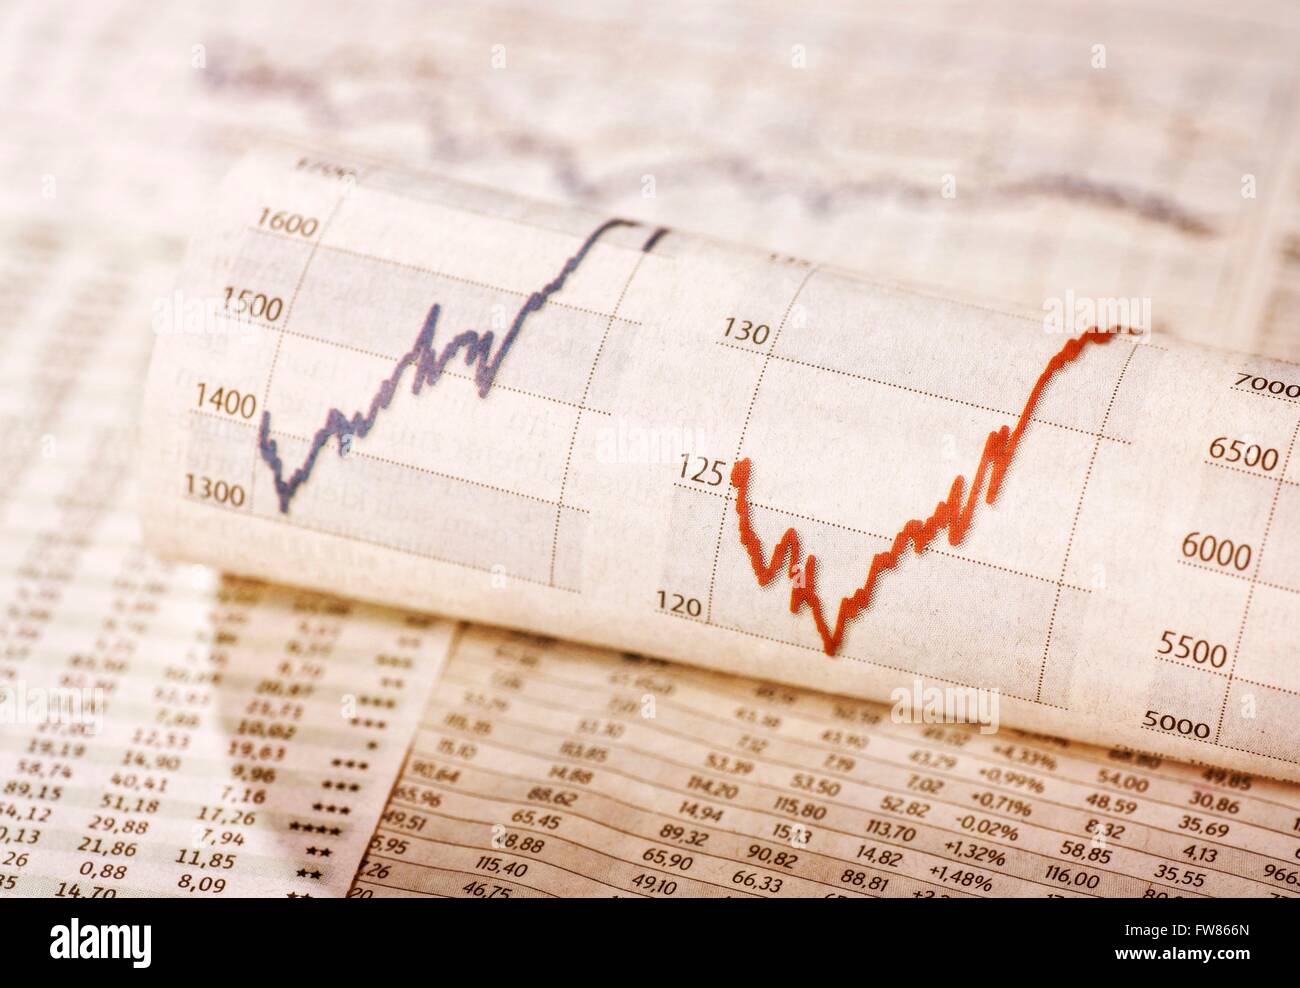 Exchange rate tables and diagrams show different stock prices. Stock Photo